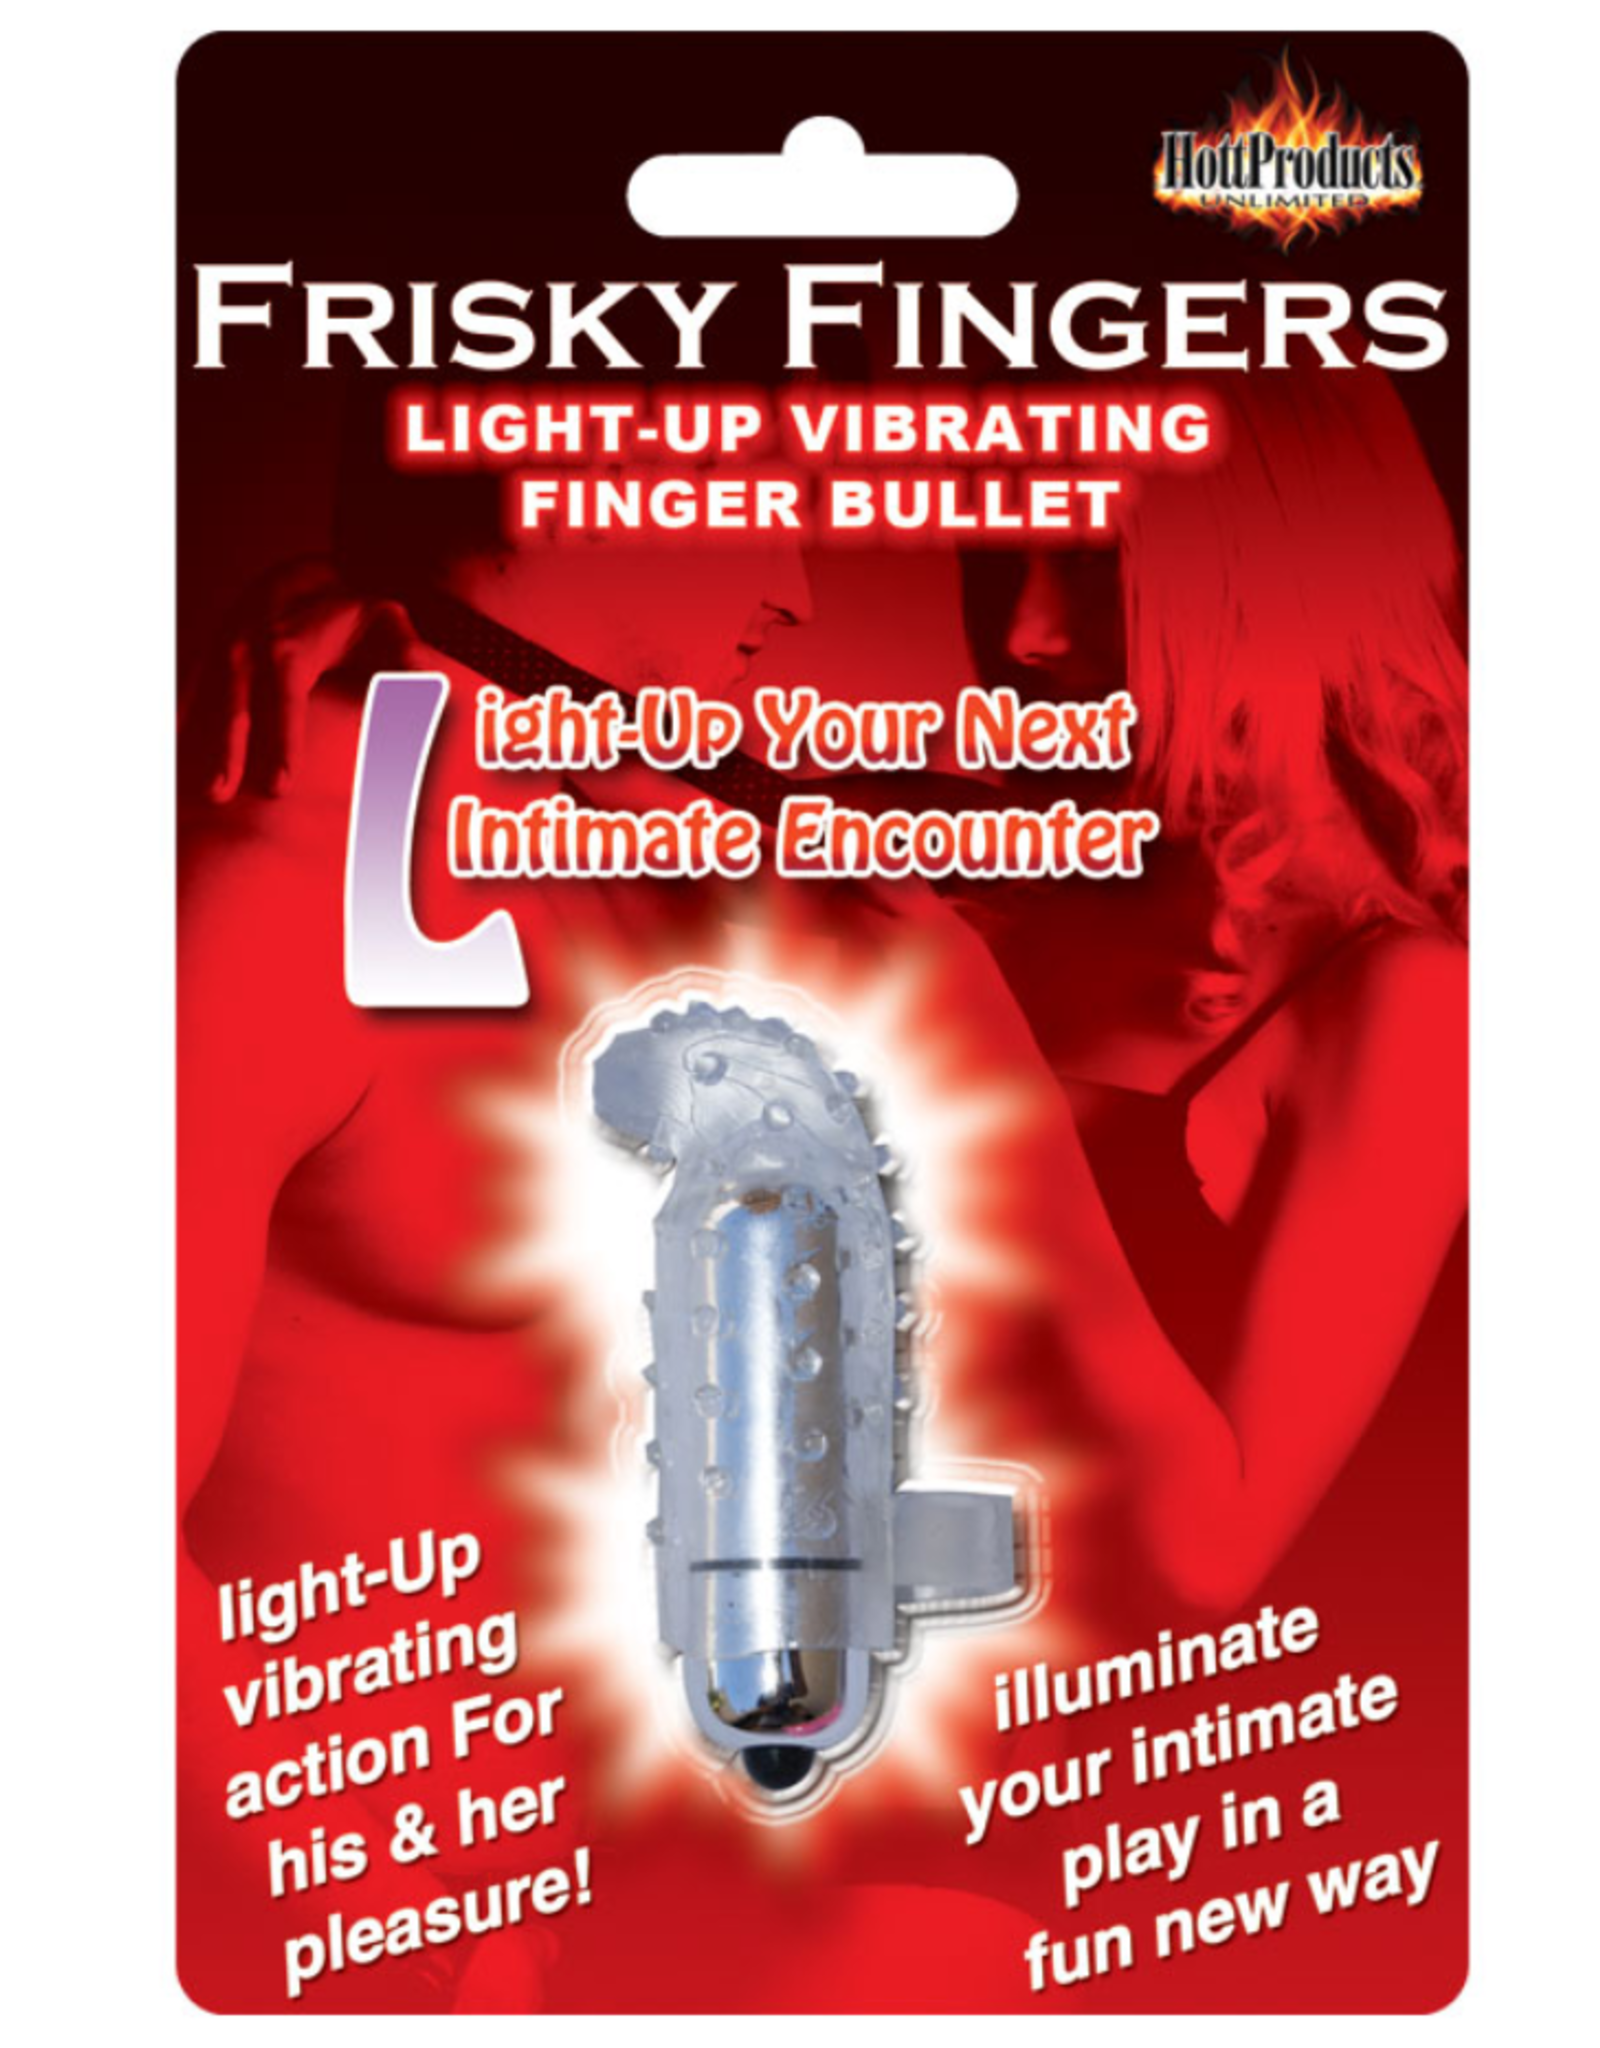 Hott Products Frisky Fingers